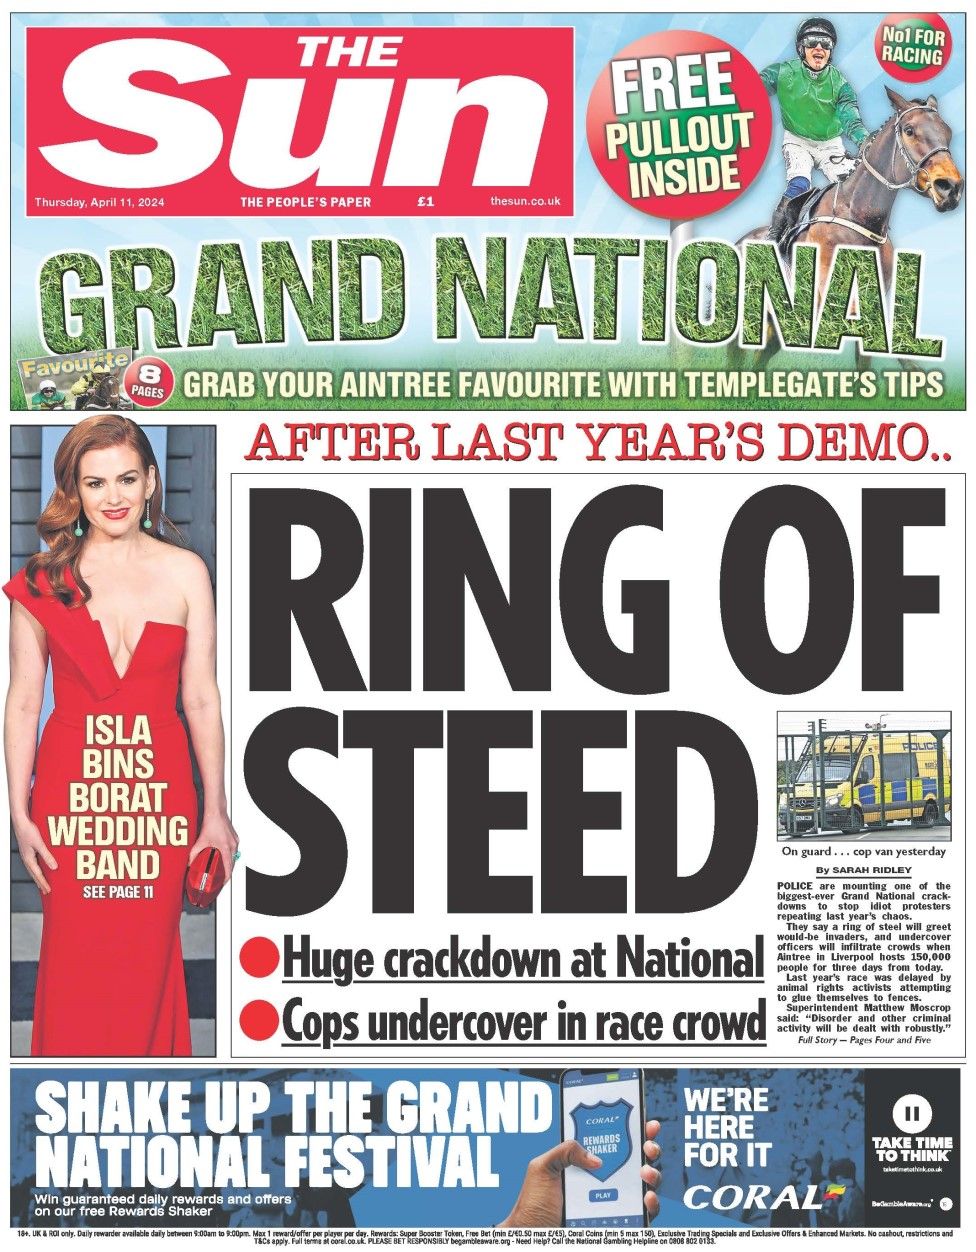 The headline in the Sun reads: Ring of steed